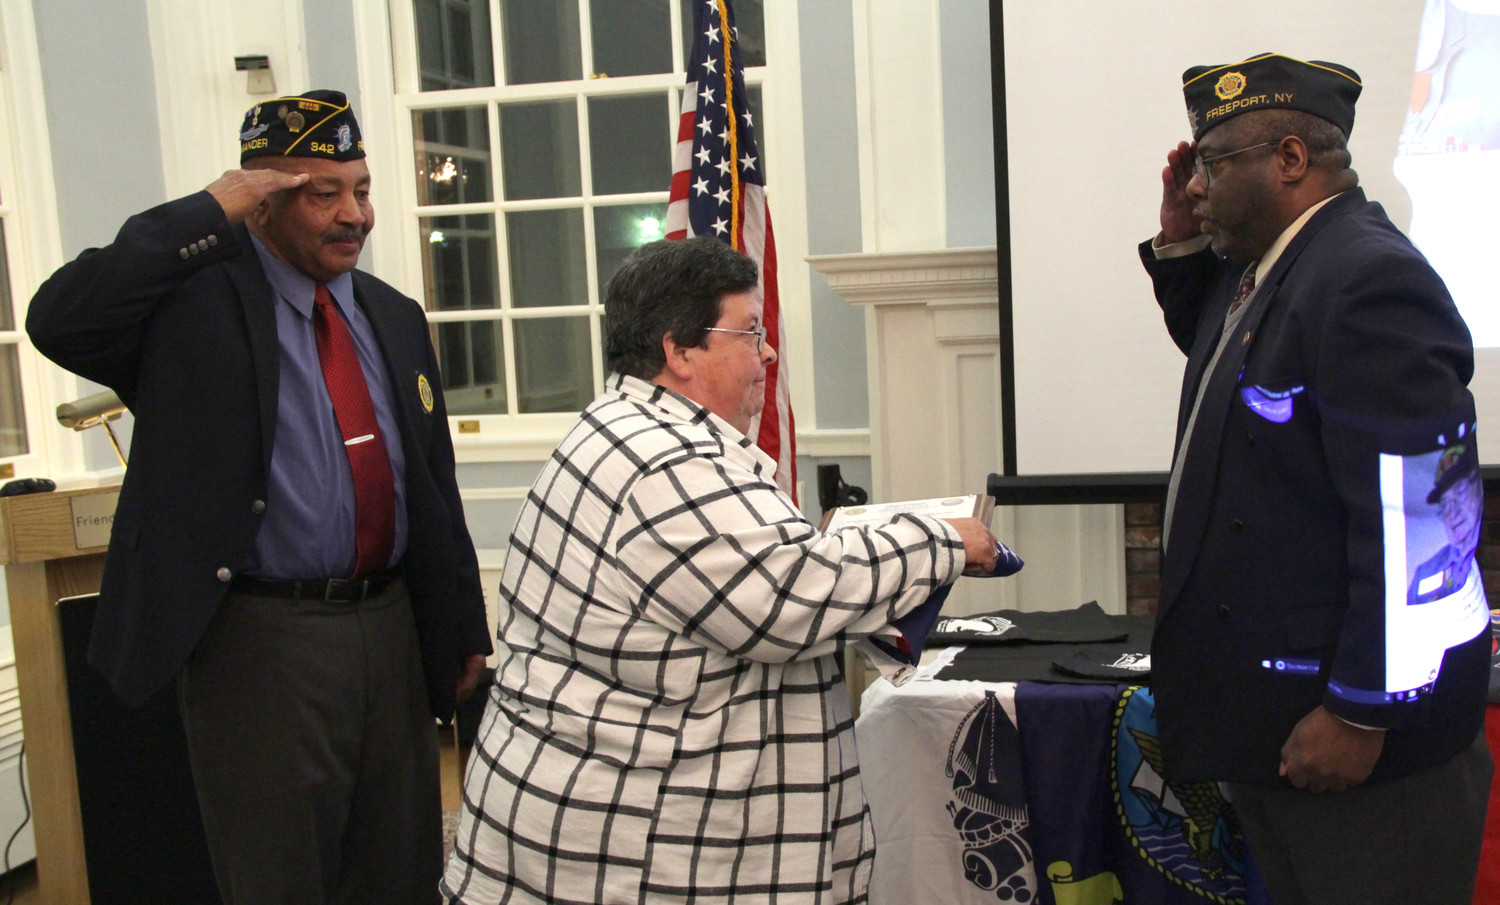 Cmdr. Coy Richardson, left and 1st Vice Cmdr. David Cockerel right, saluted Bonnie Barbosa, Gerard Barbosa’s daughter, after presenting her with special posthumous recognition for her father’s contributions to the military, and to American Legion William Clinton Story Post 342.